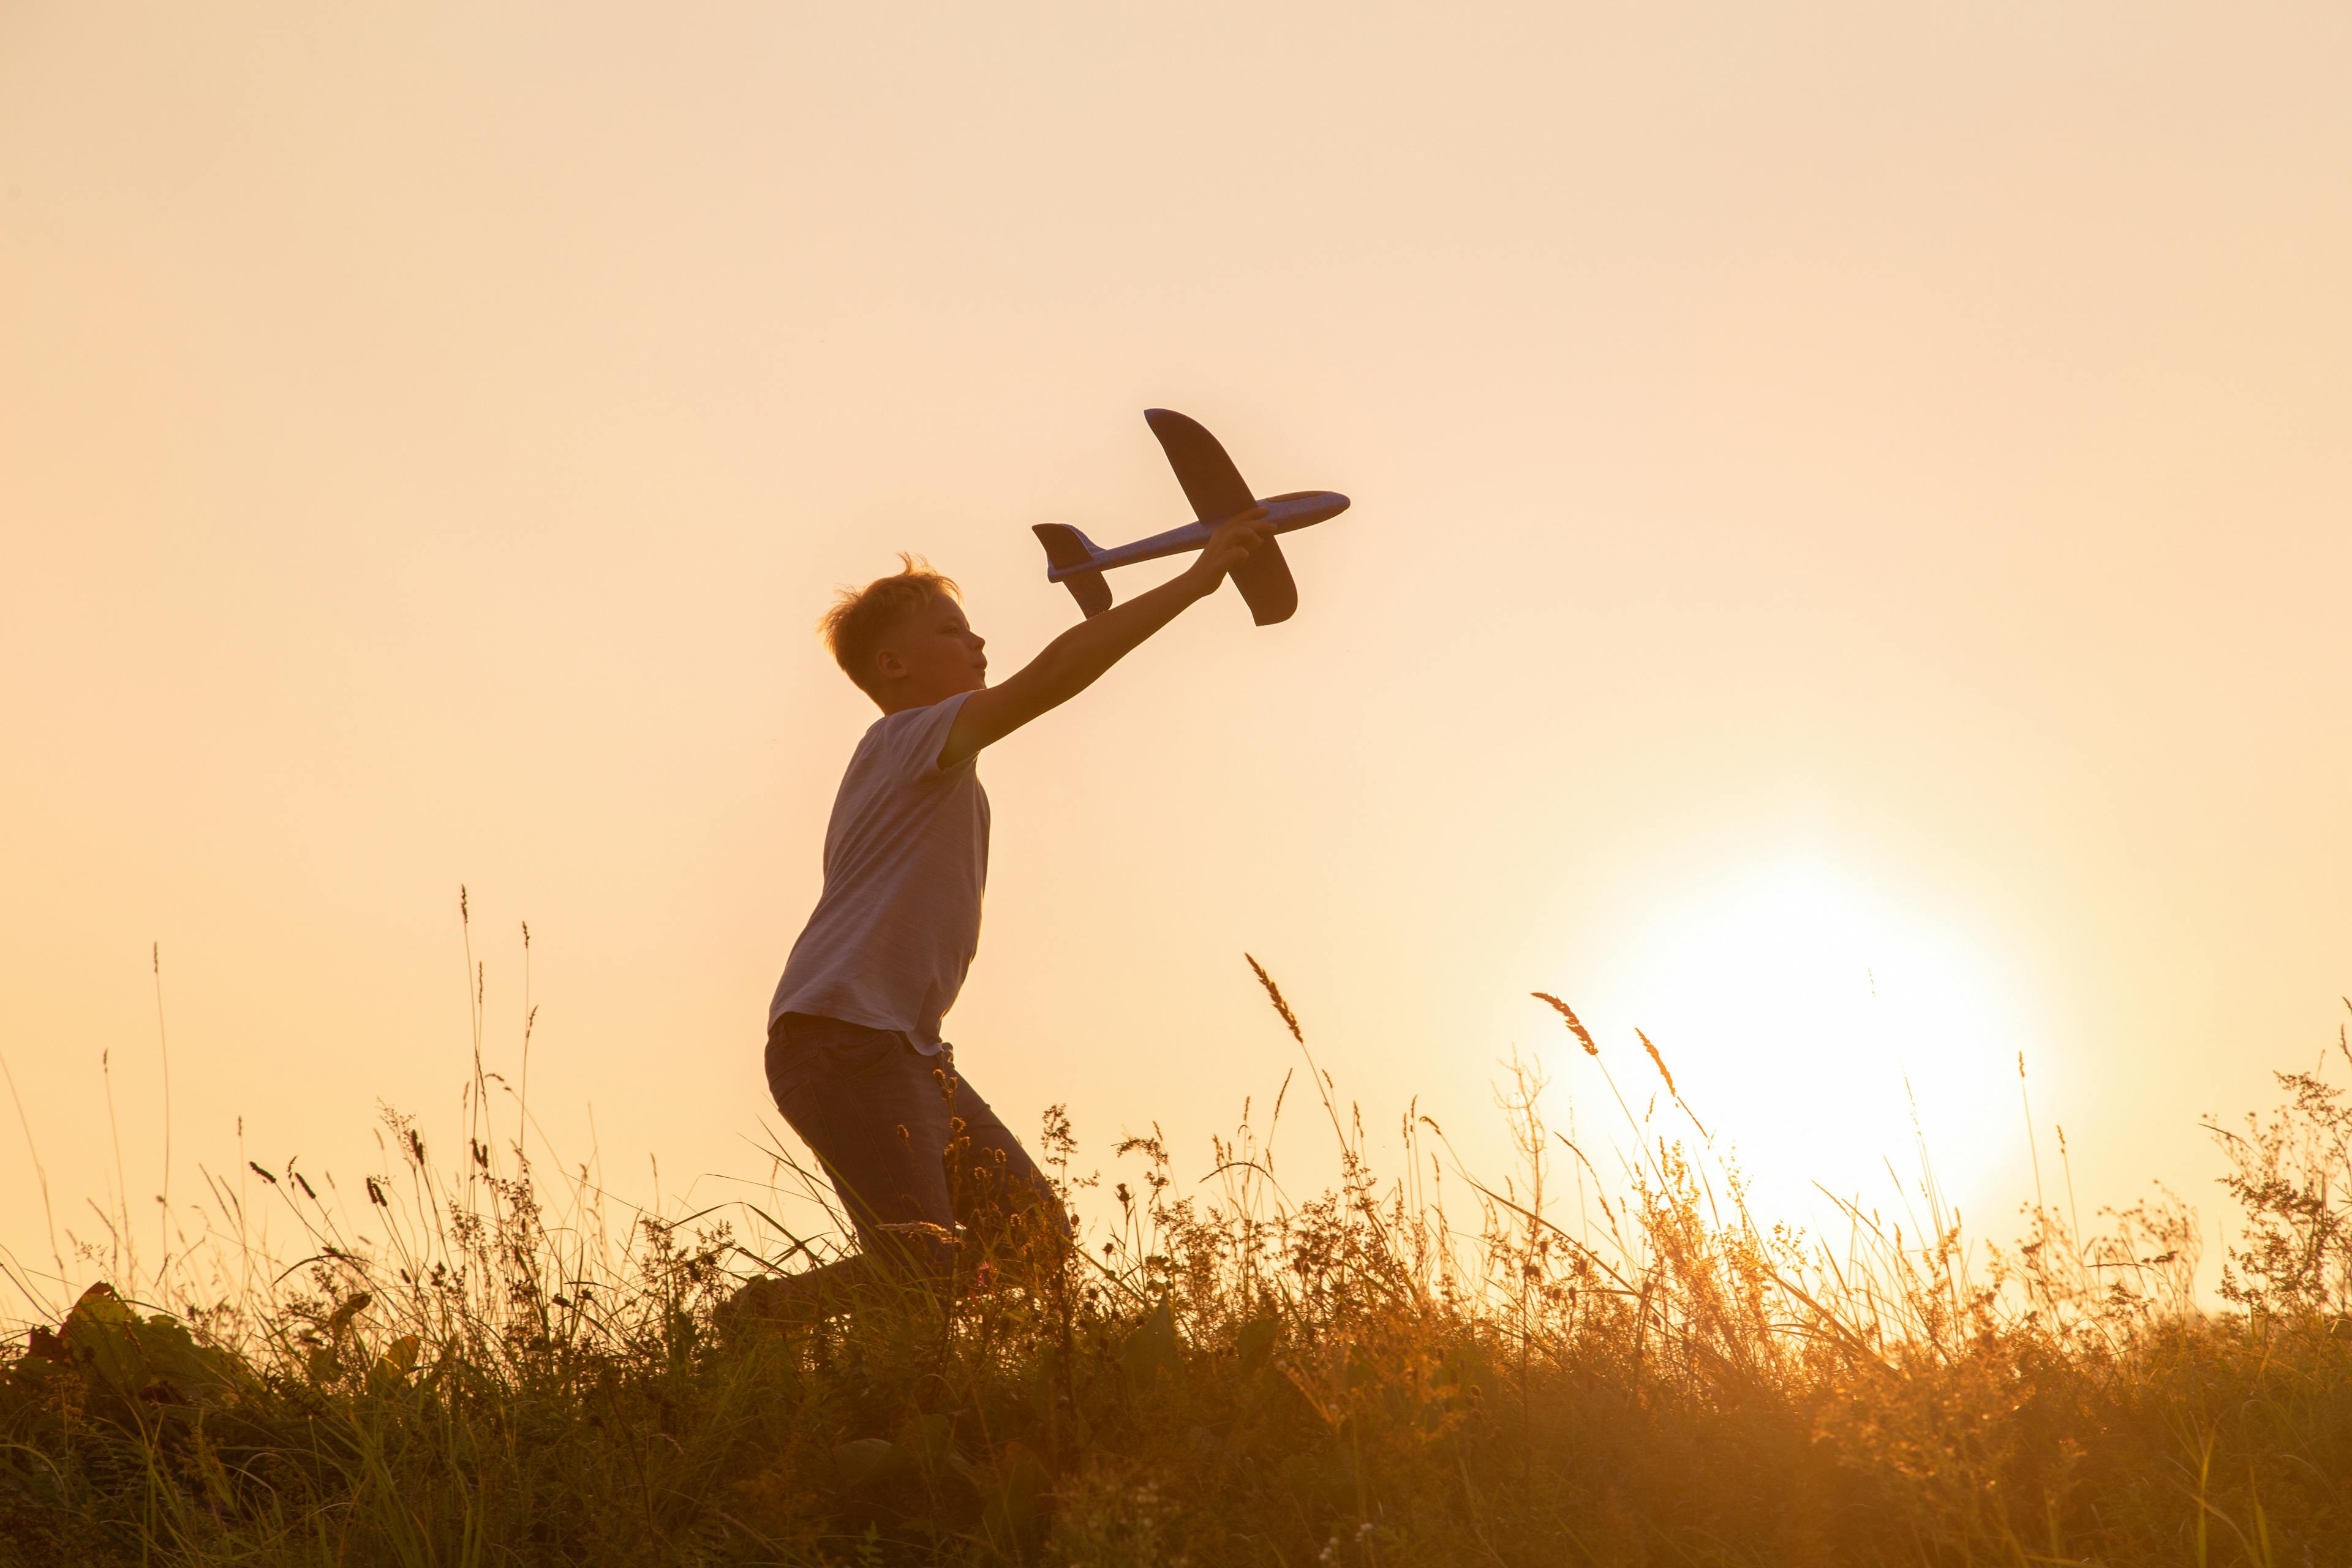 Boy playing with model plane at sunset